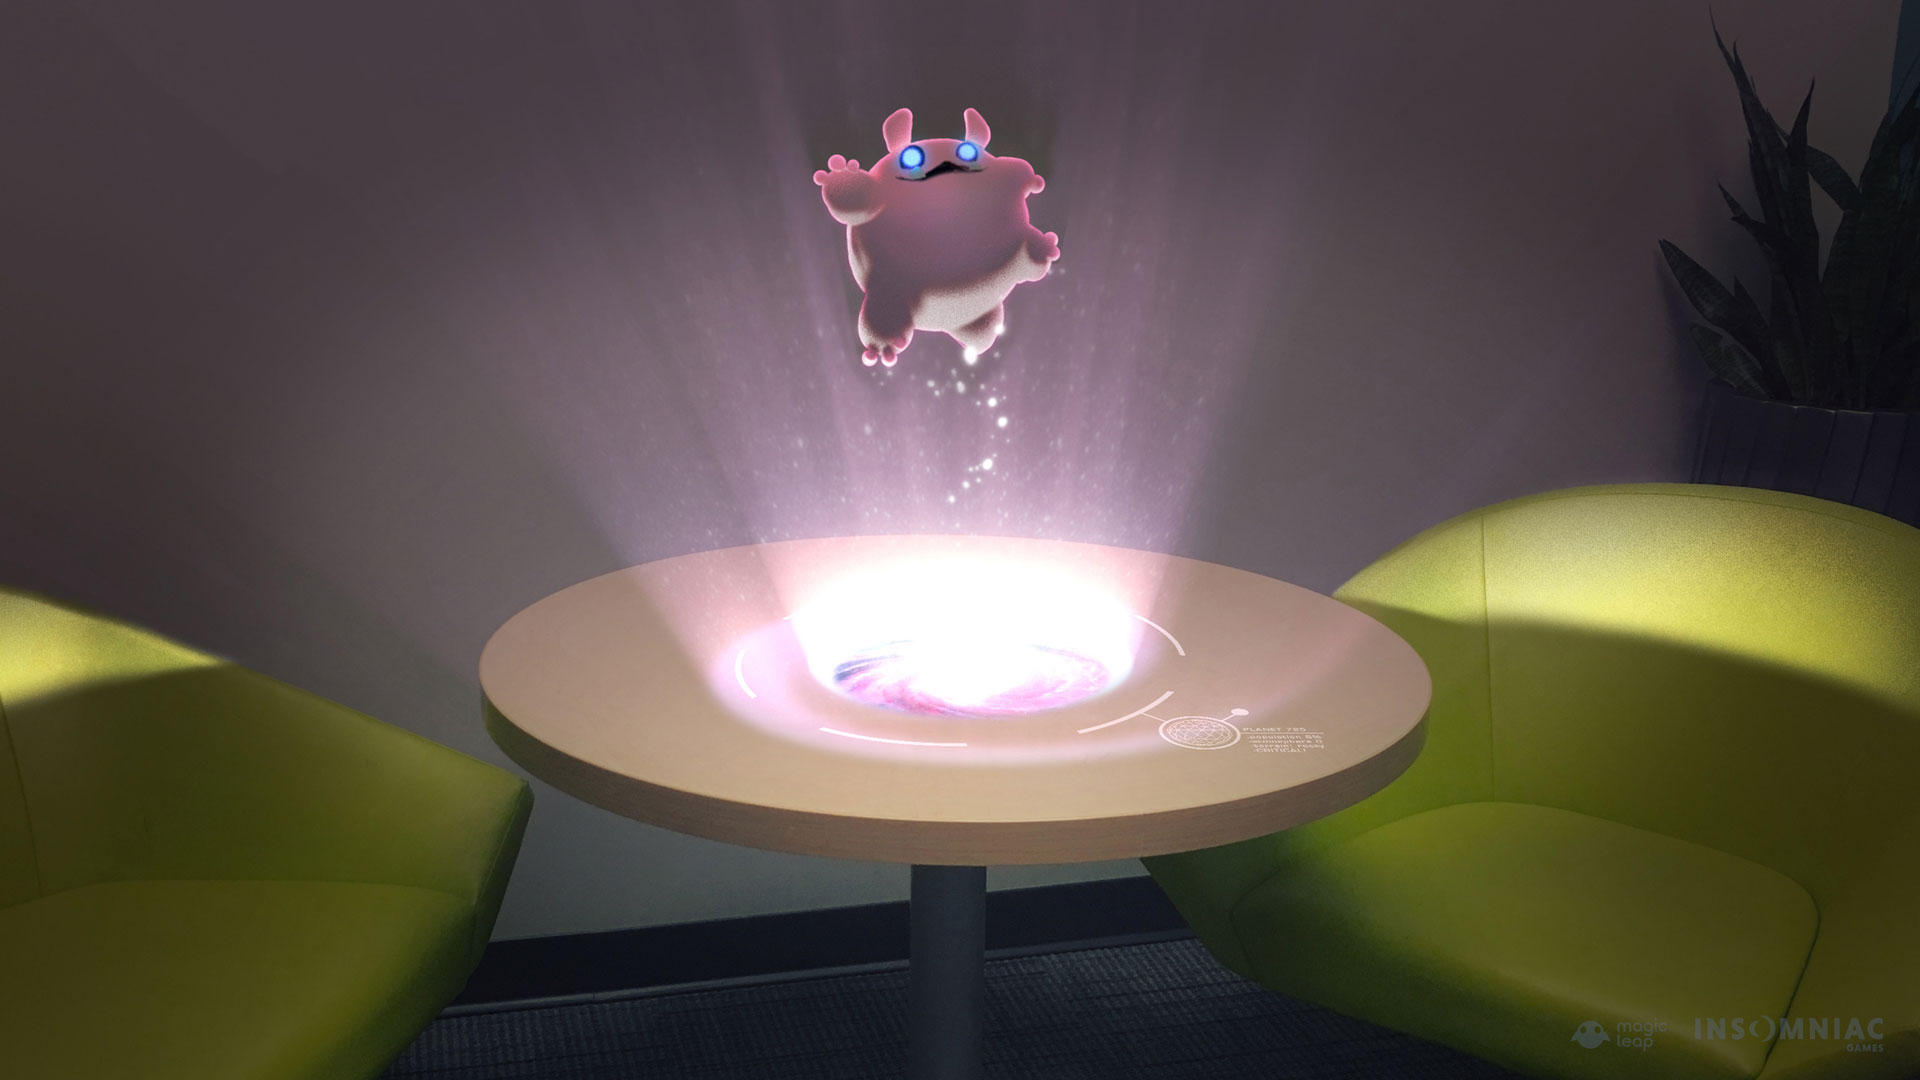 seedling magic leap experience teaser image